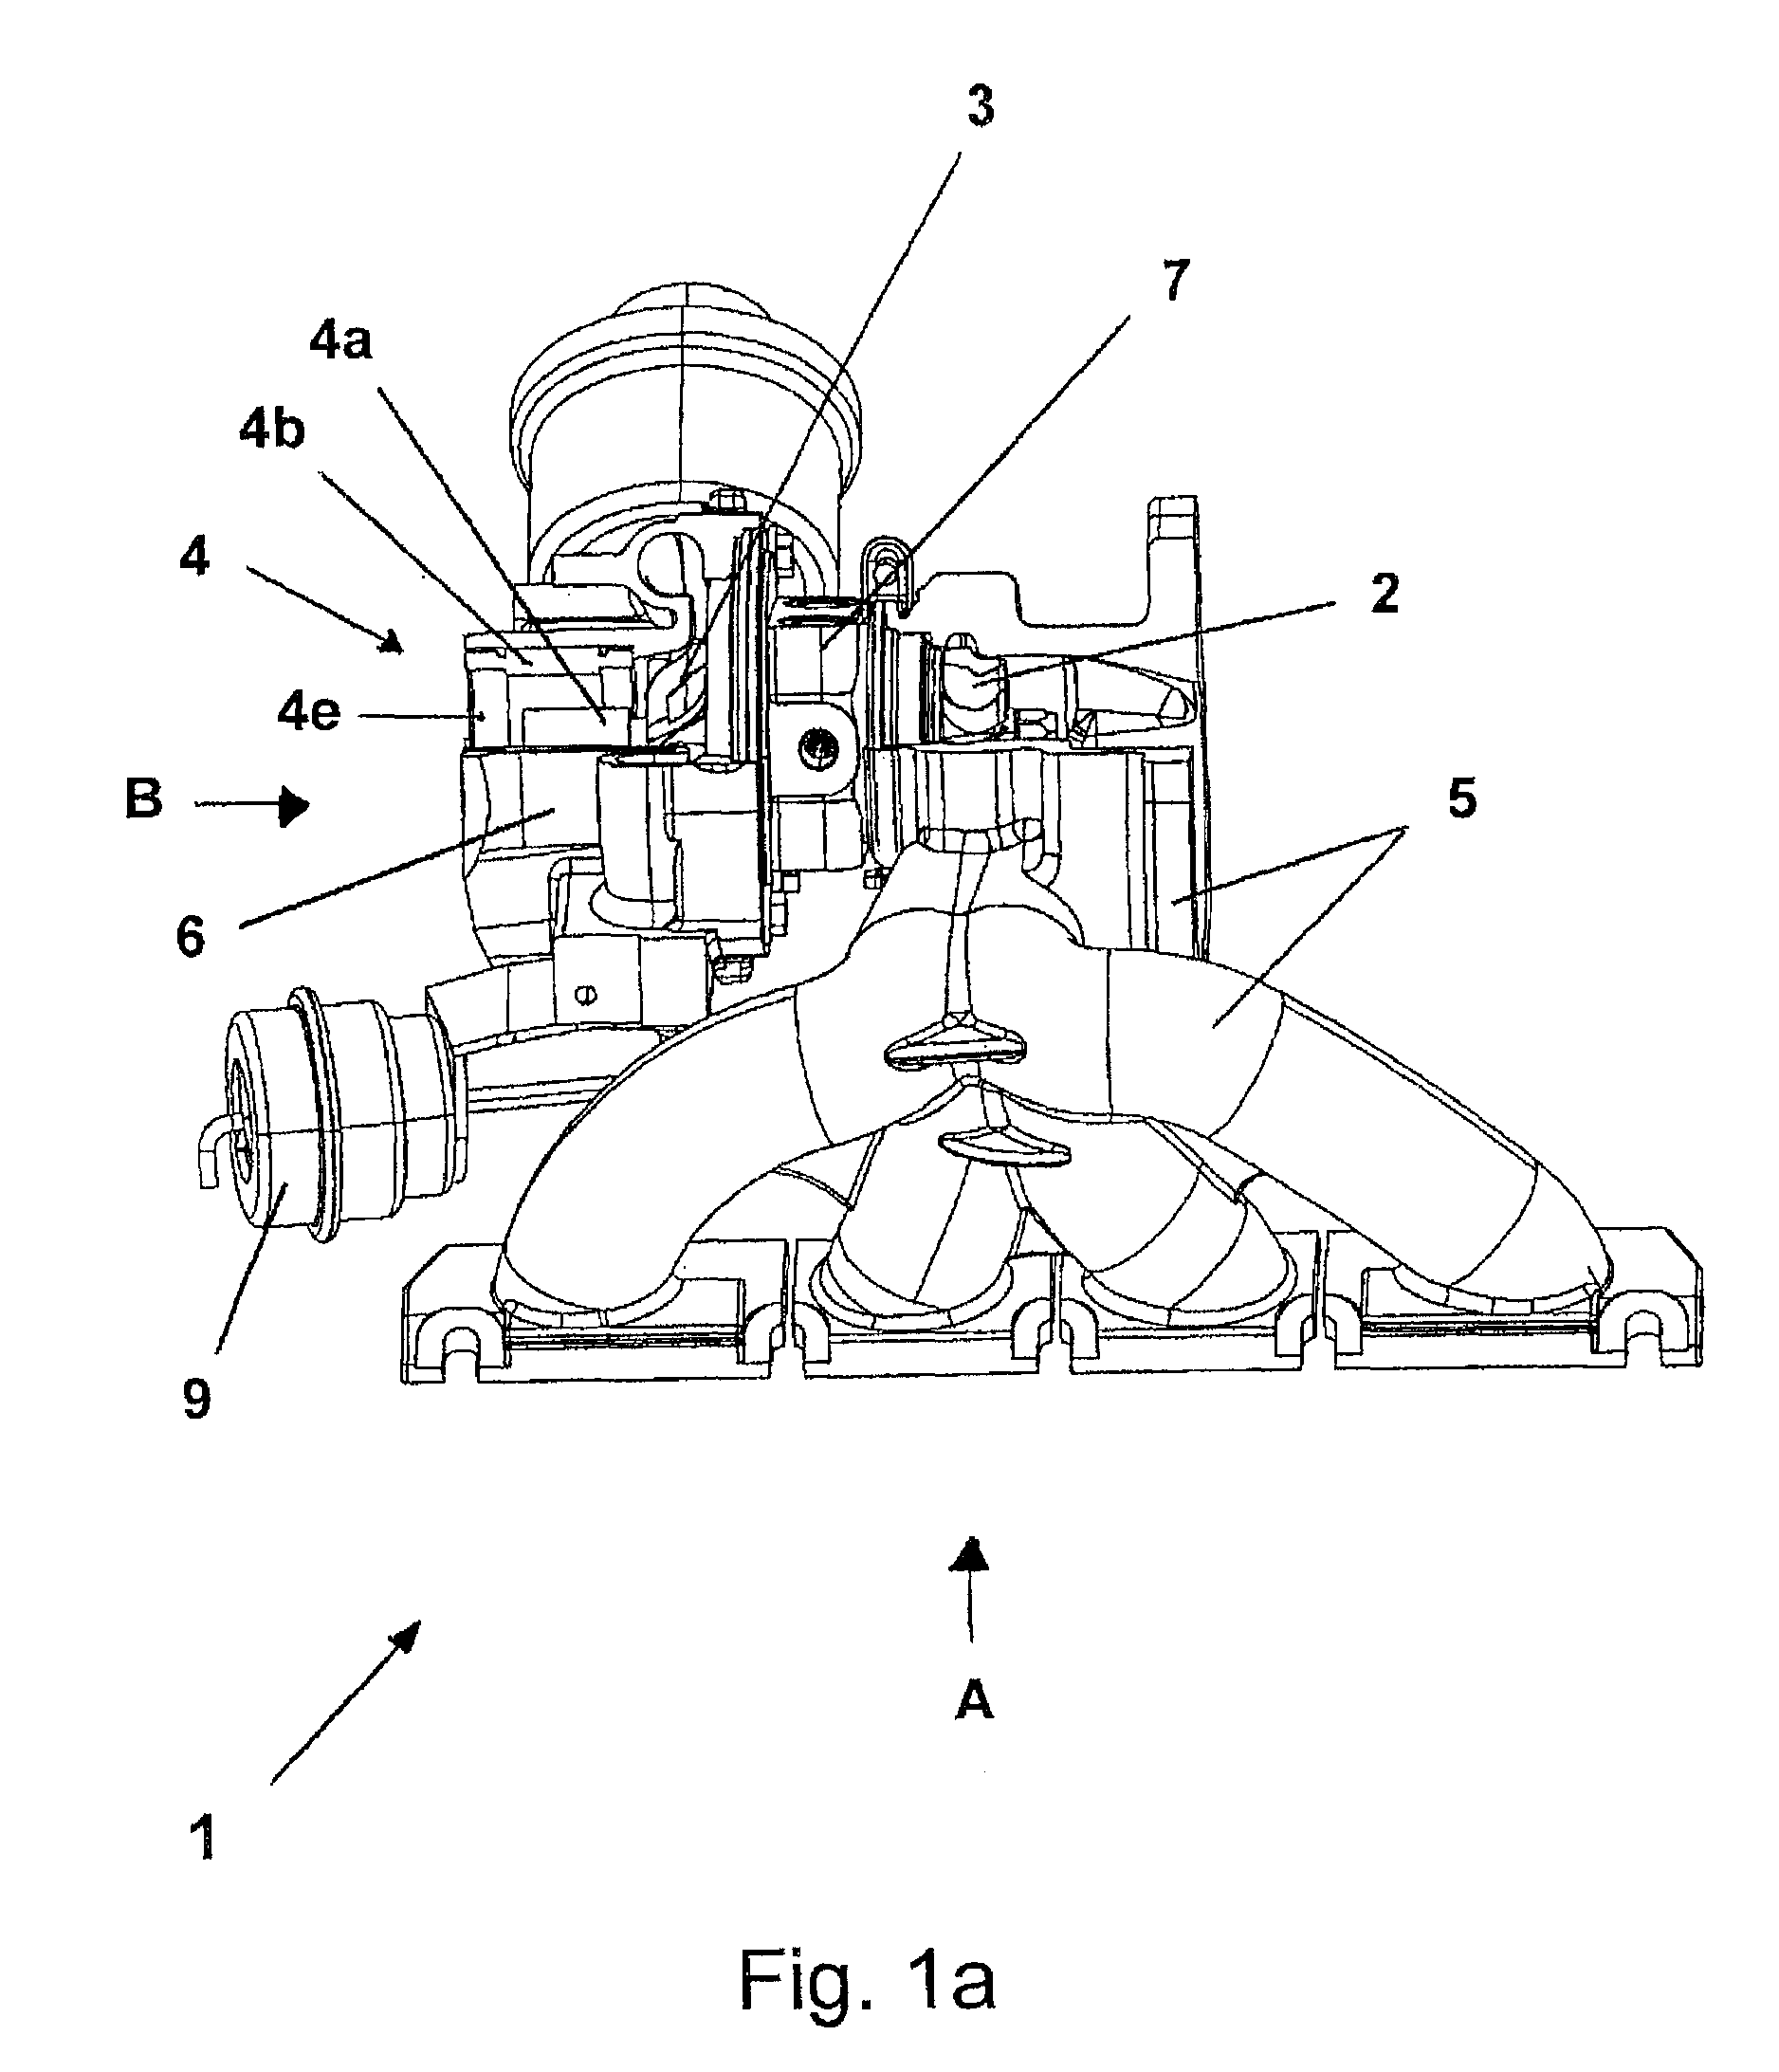 TurboCharger with an electric motor